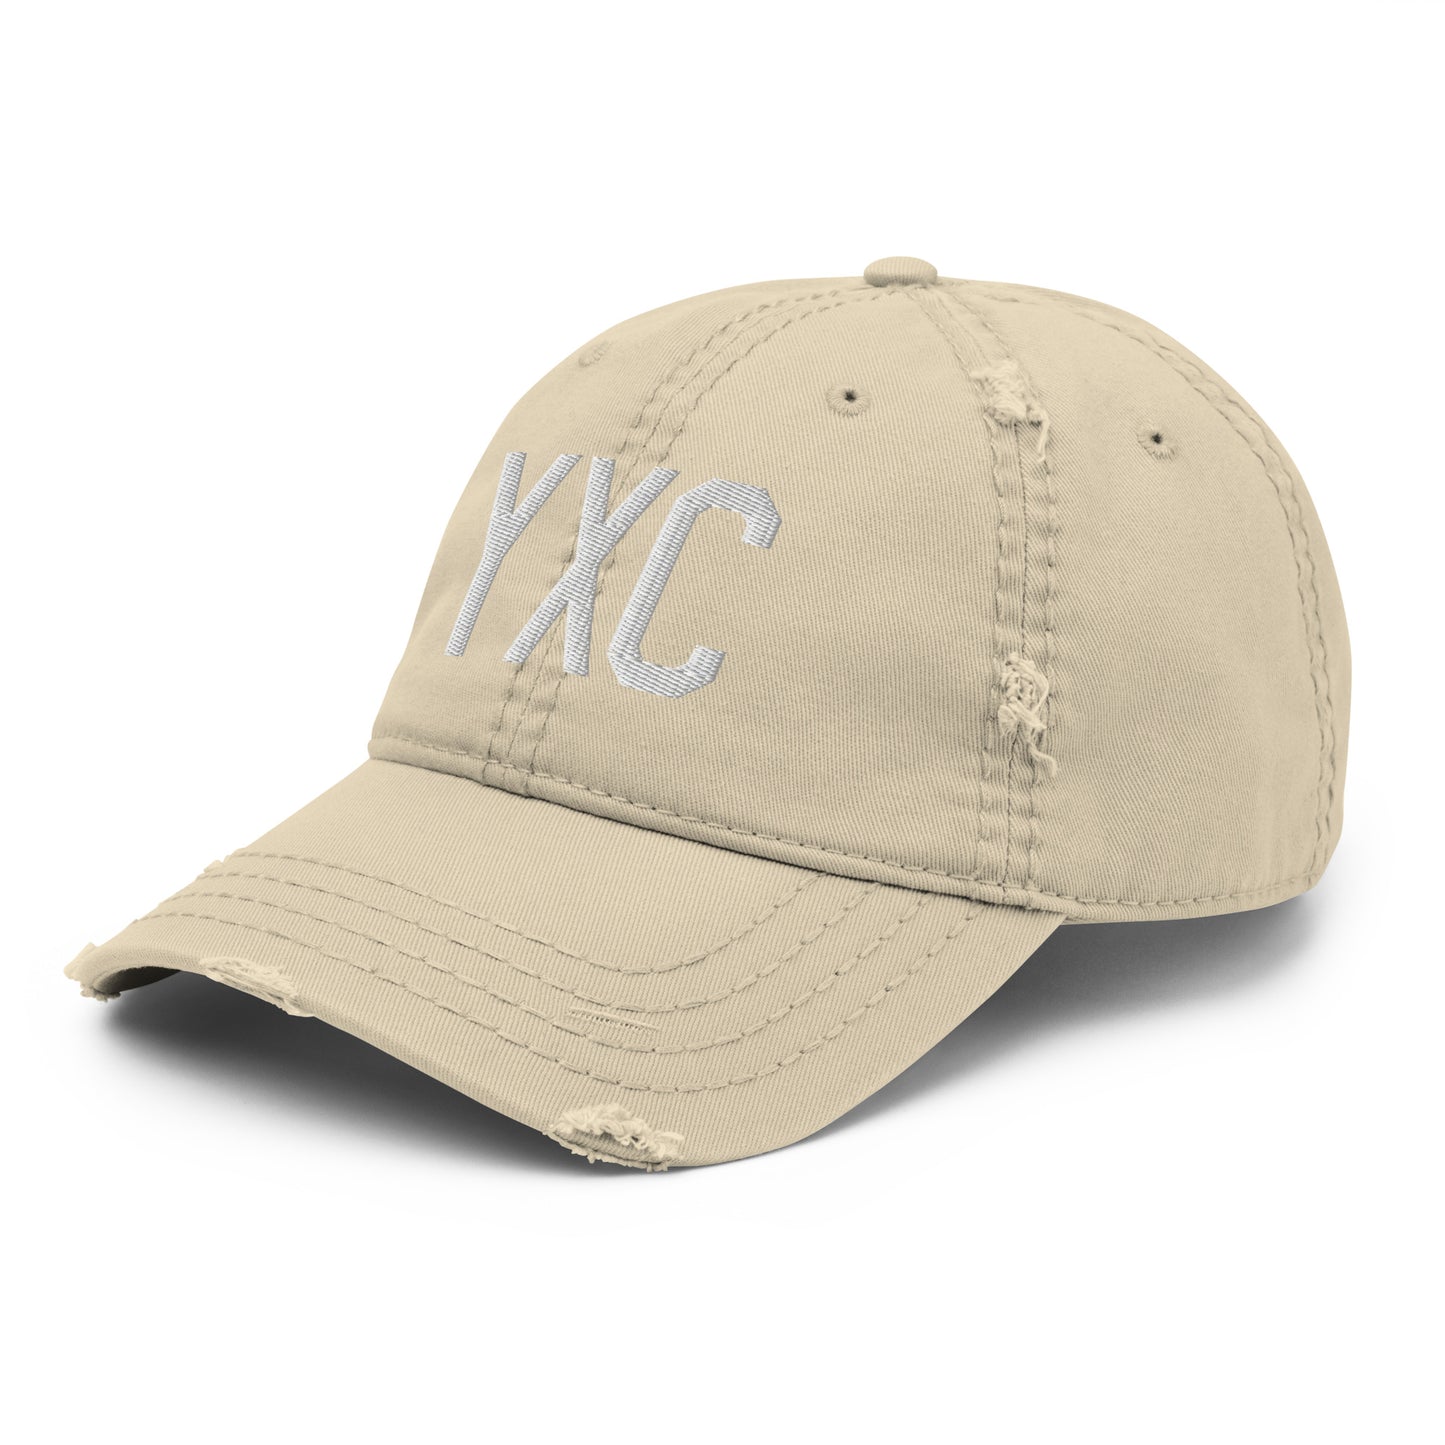 Airport Code Distressed Hat - White • YXC Cranbrook • YHM Designs - Image 19